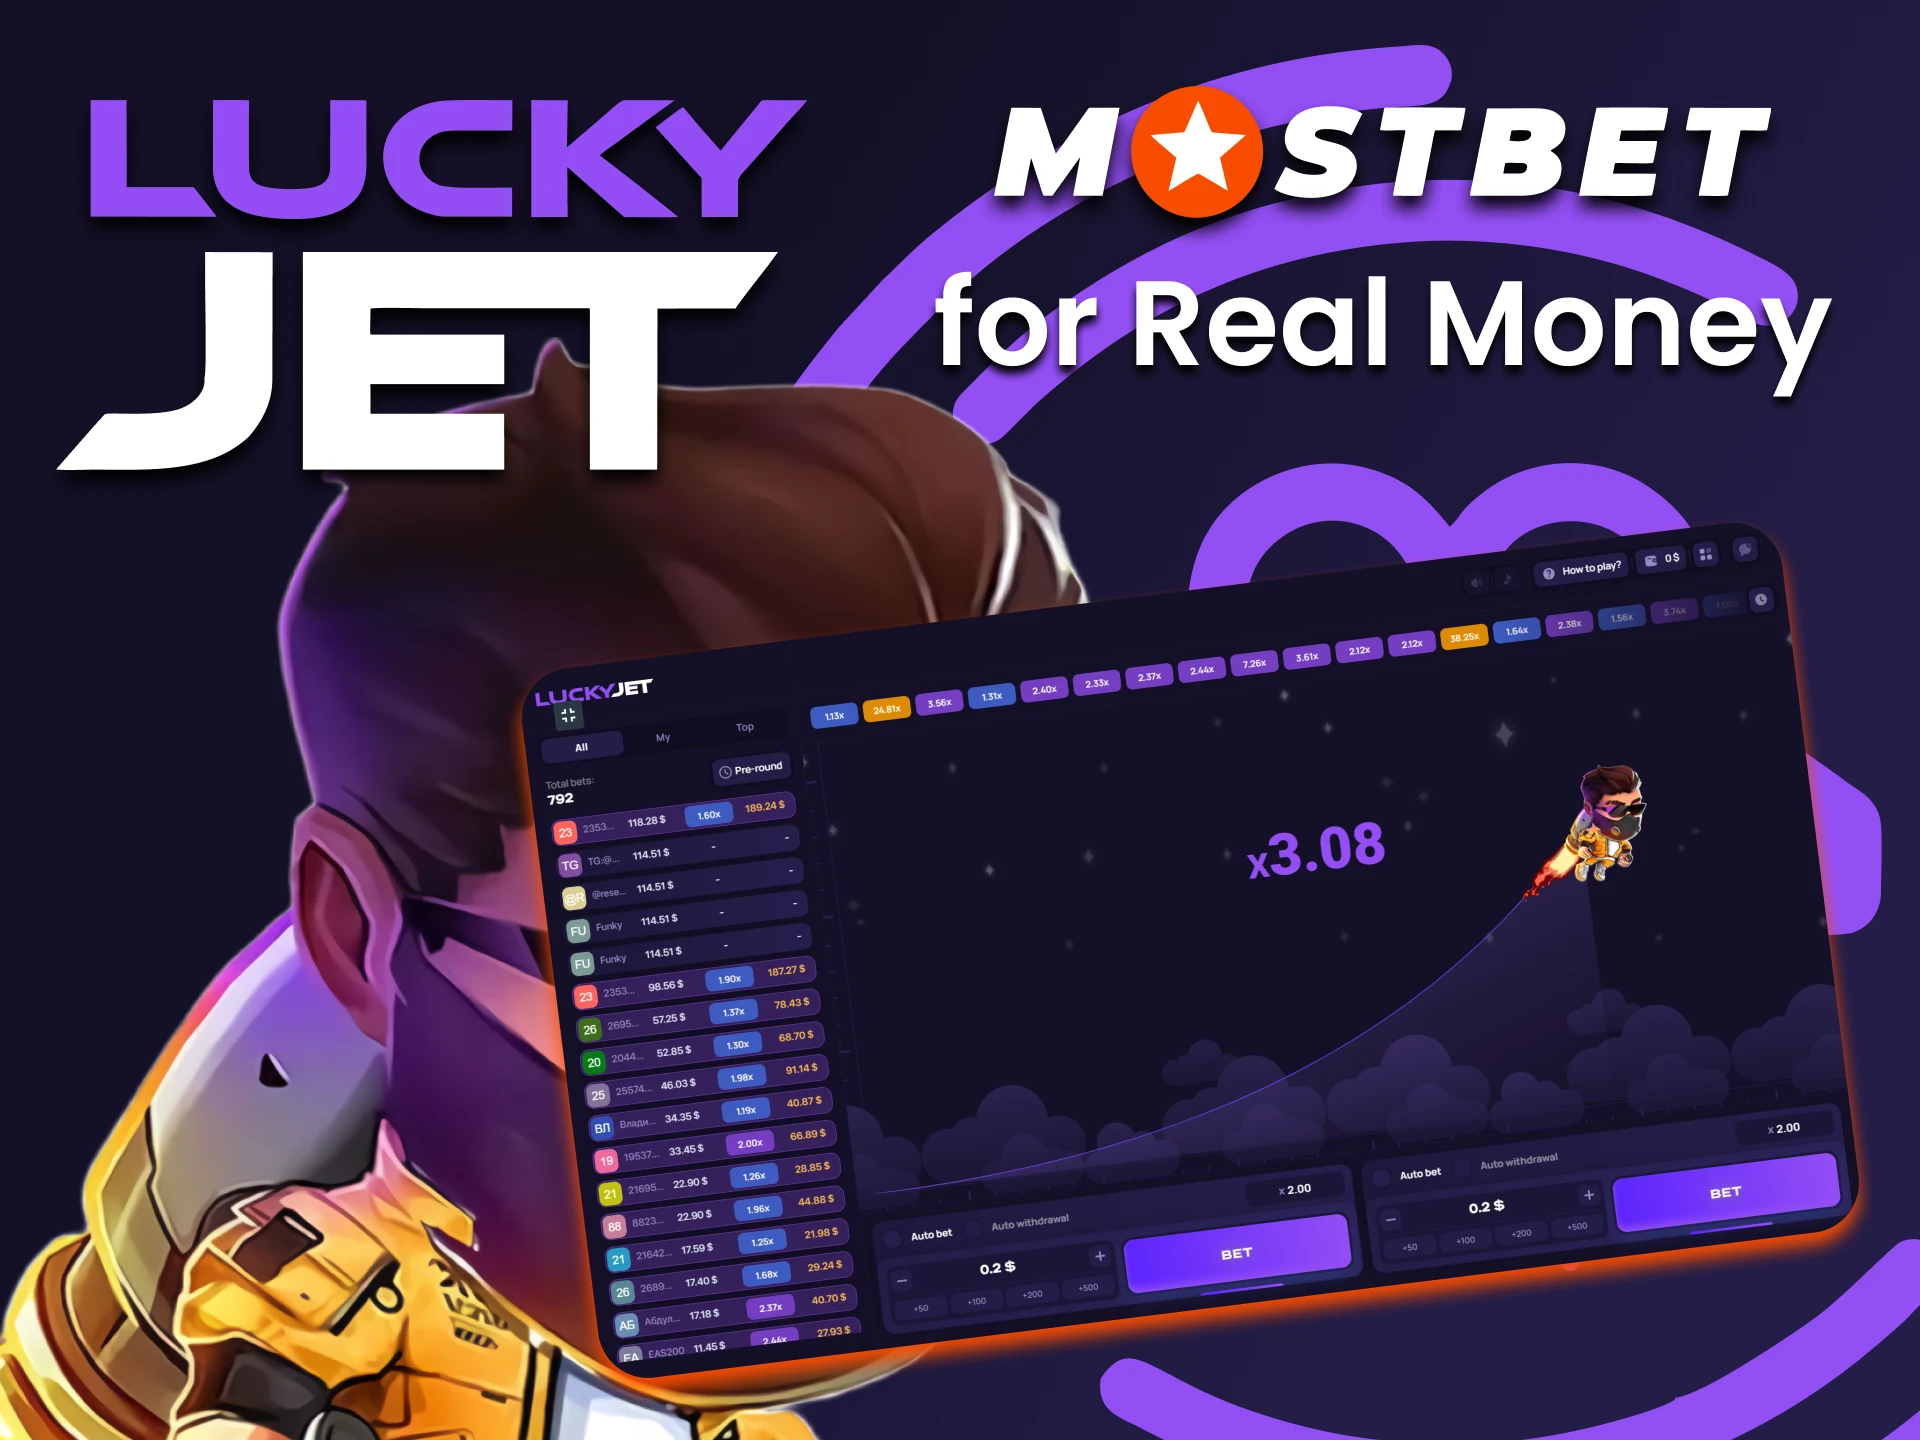 To play for real money in Lucky Jet, you need to fund your account at Mostbet.